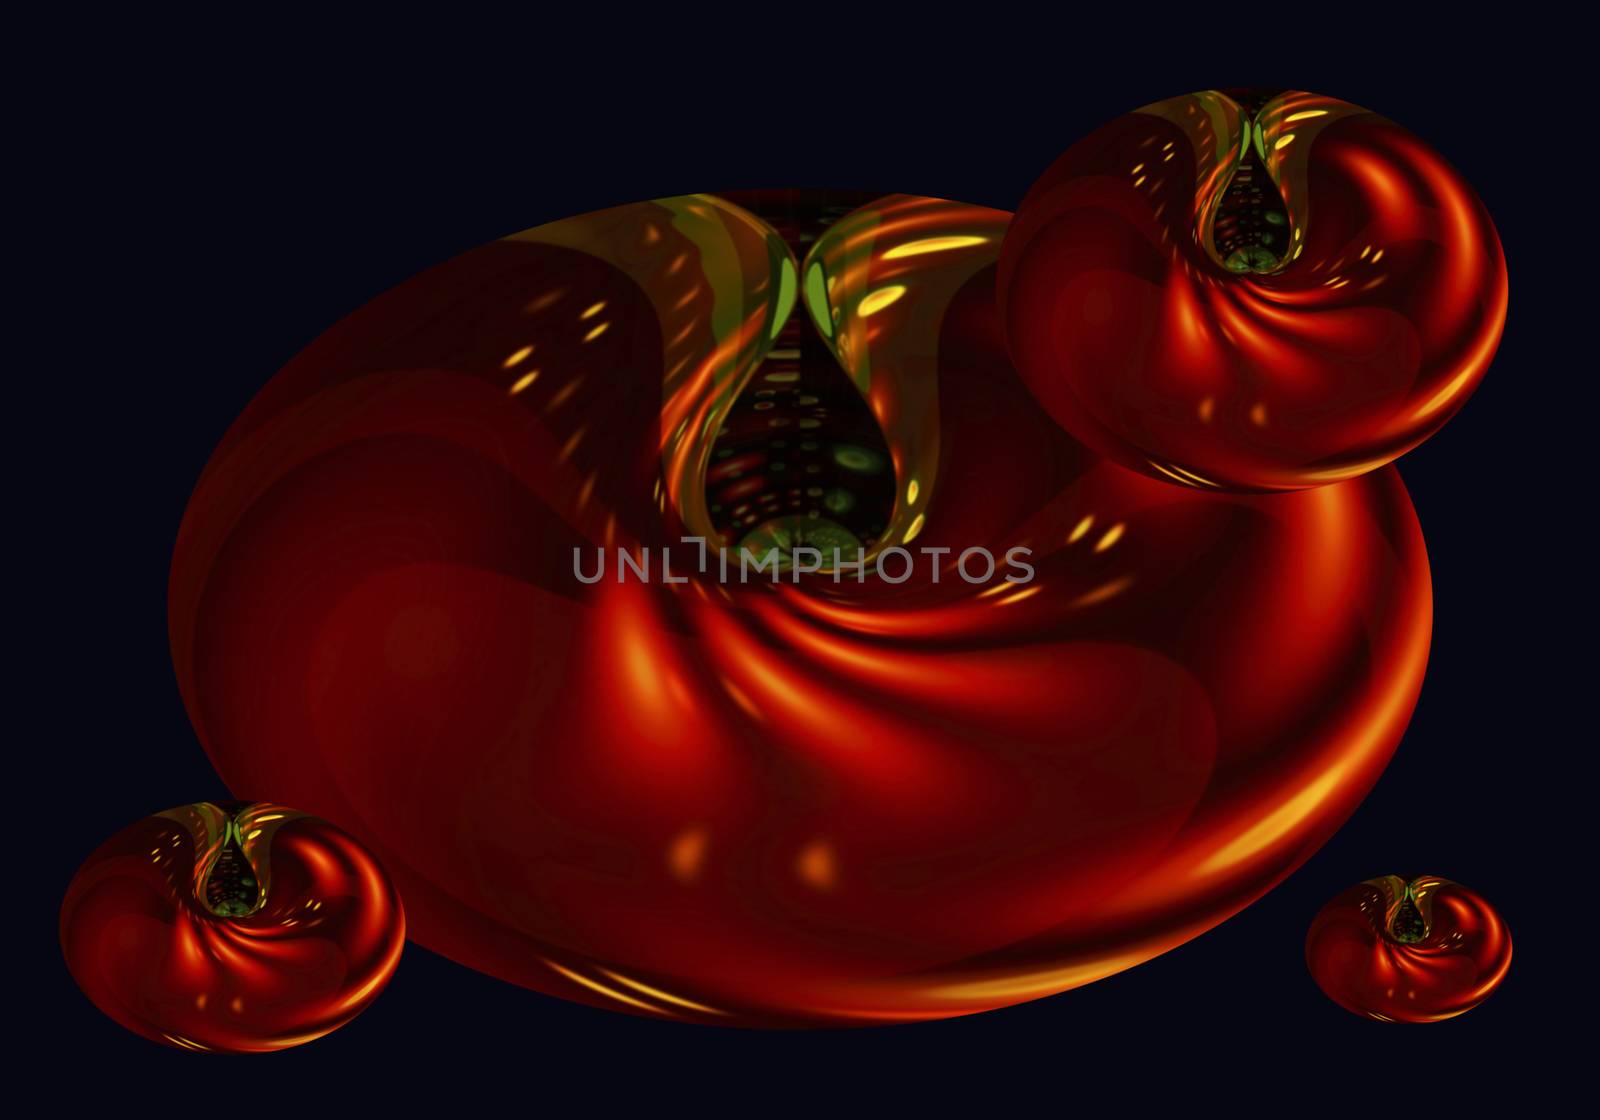 Genno the modified tomatoes by creativ000creativ